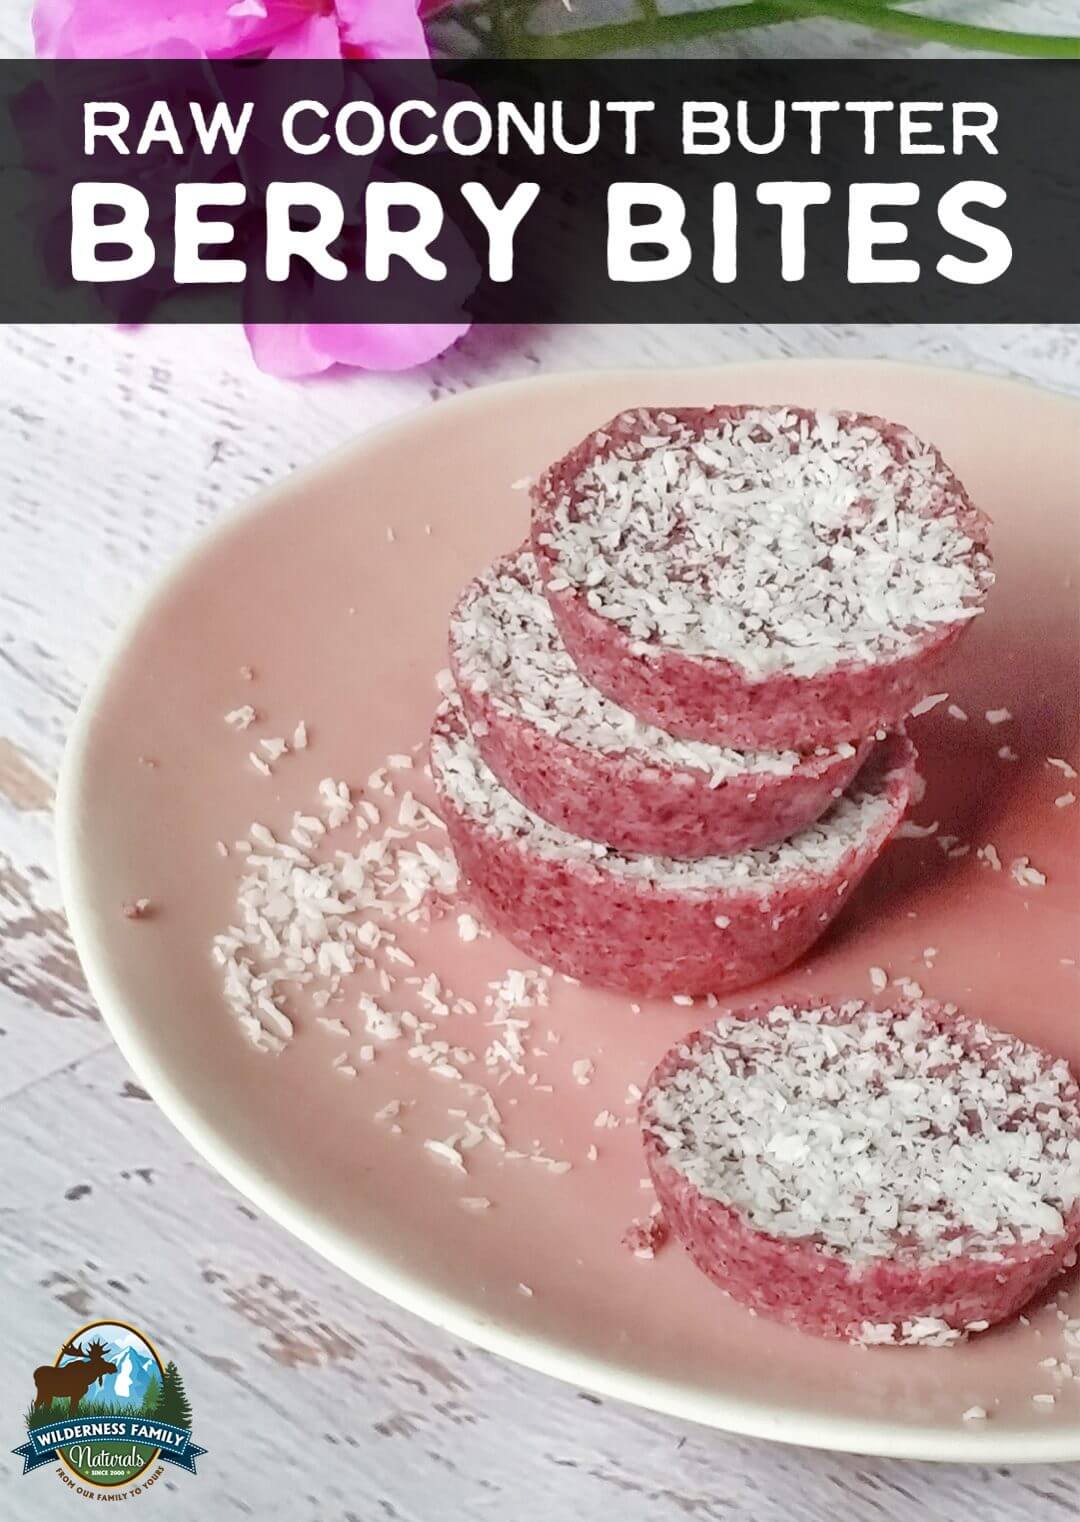 Raw Coconut Butter Berry Bites